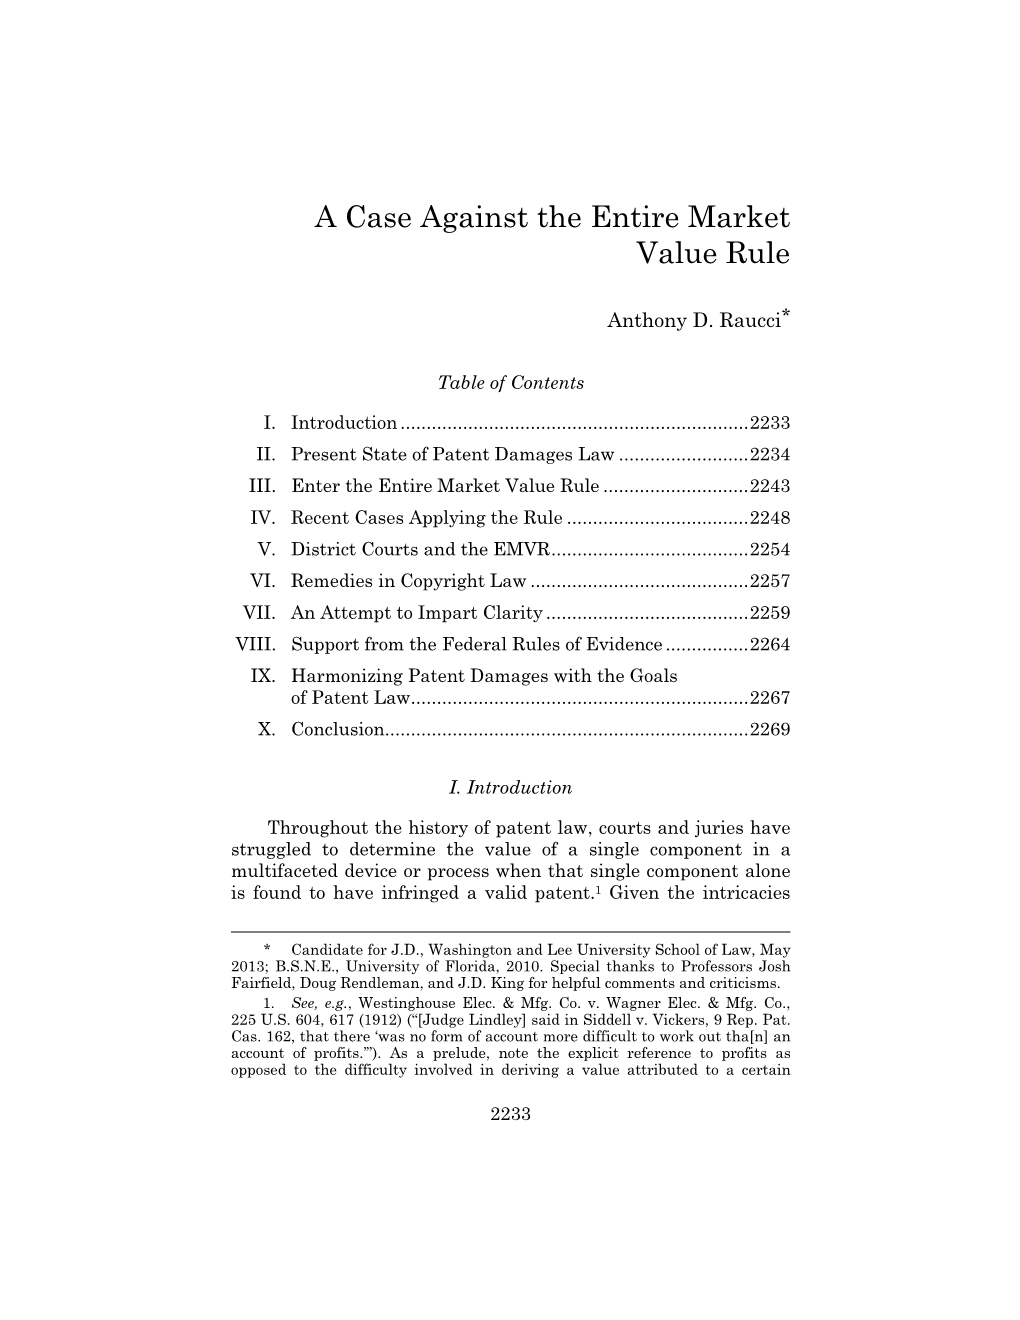 A Case Against the Entire Market Value Rule